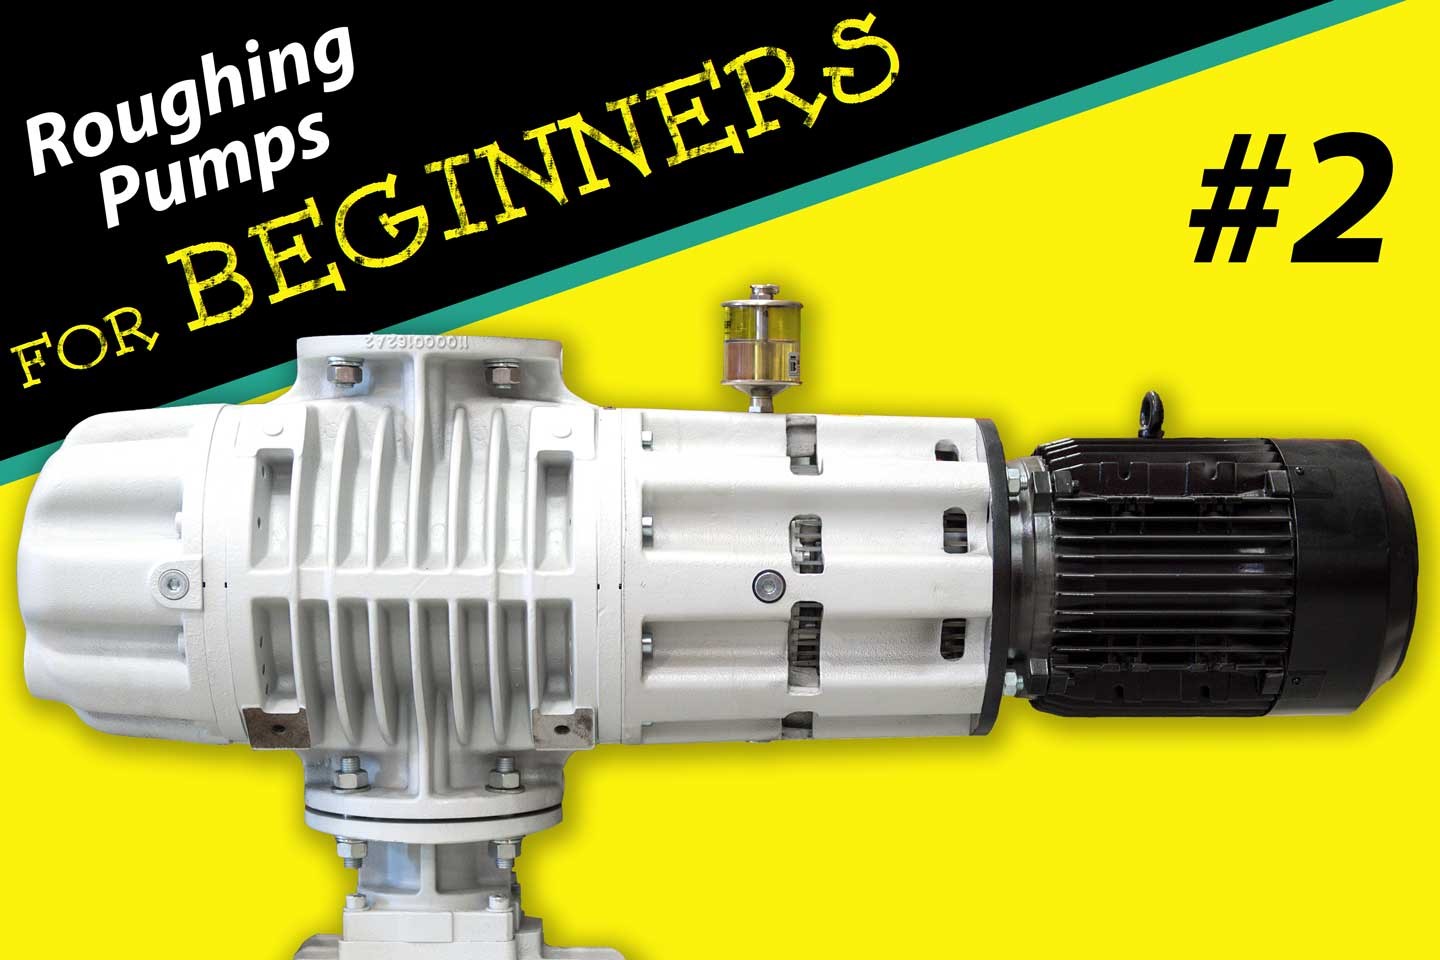 Roughing pump in high-vacuum furnaces for beginners [2/2]